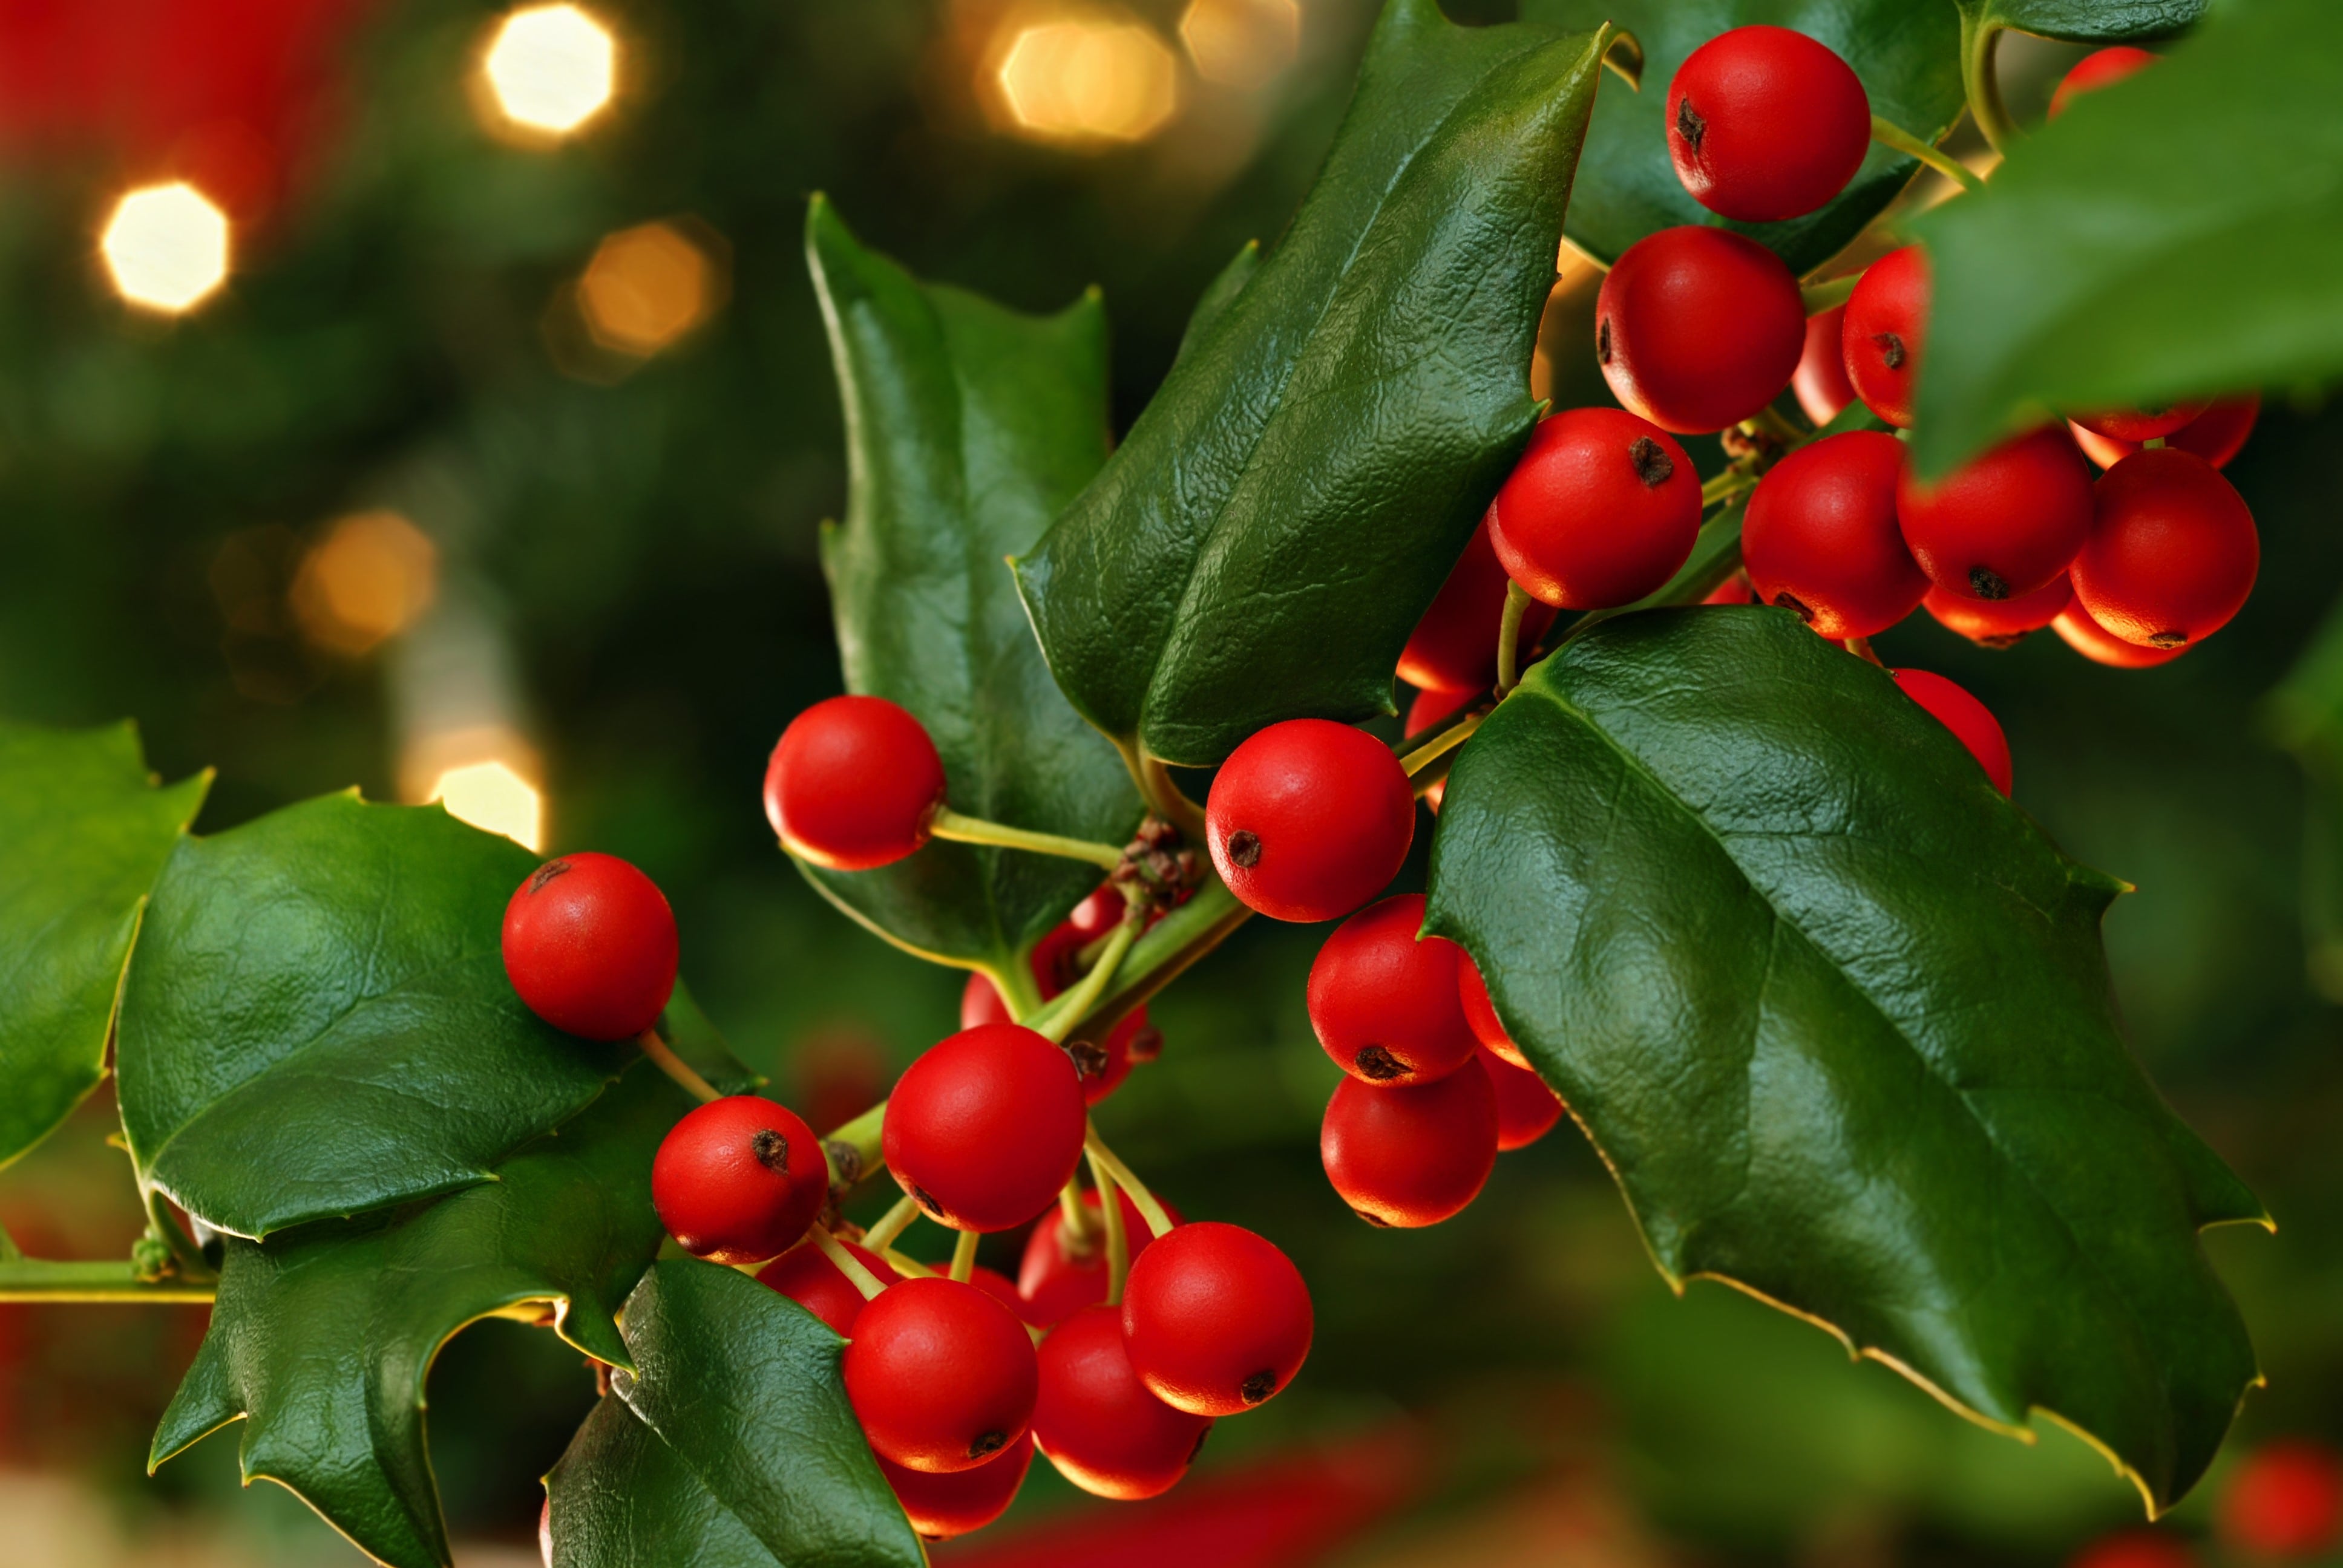 Real Holly Bunches for Christmas